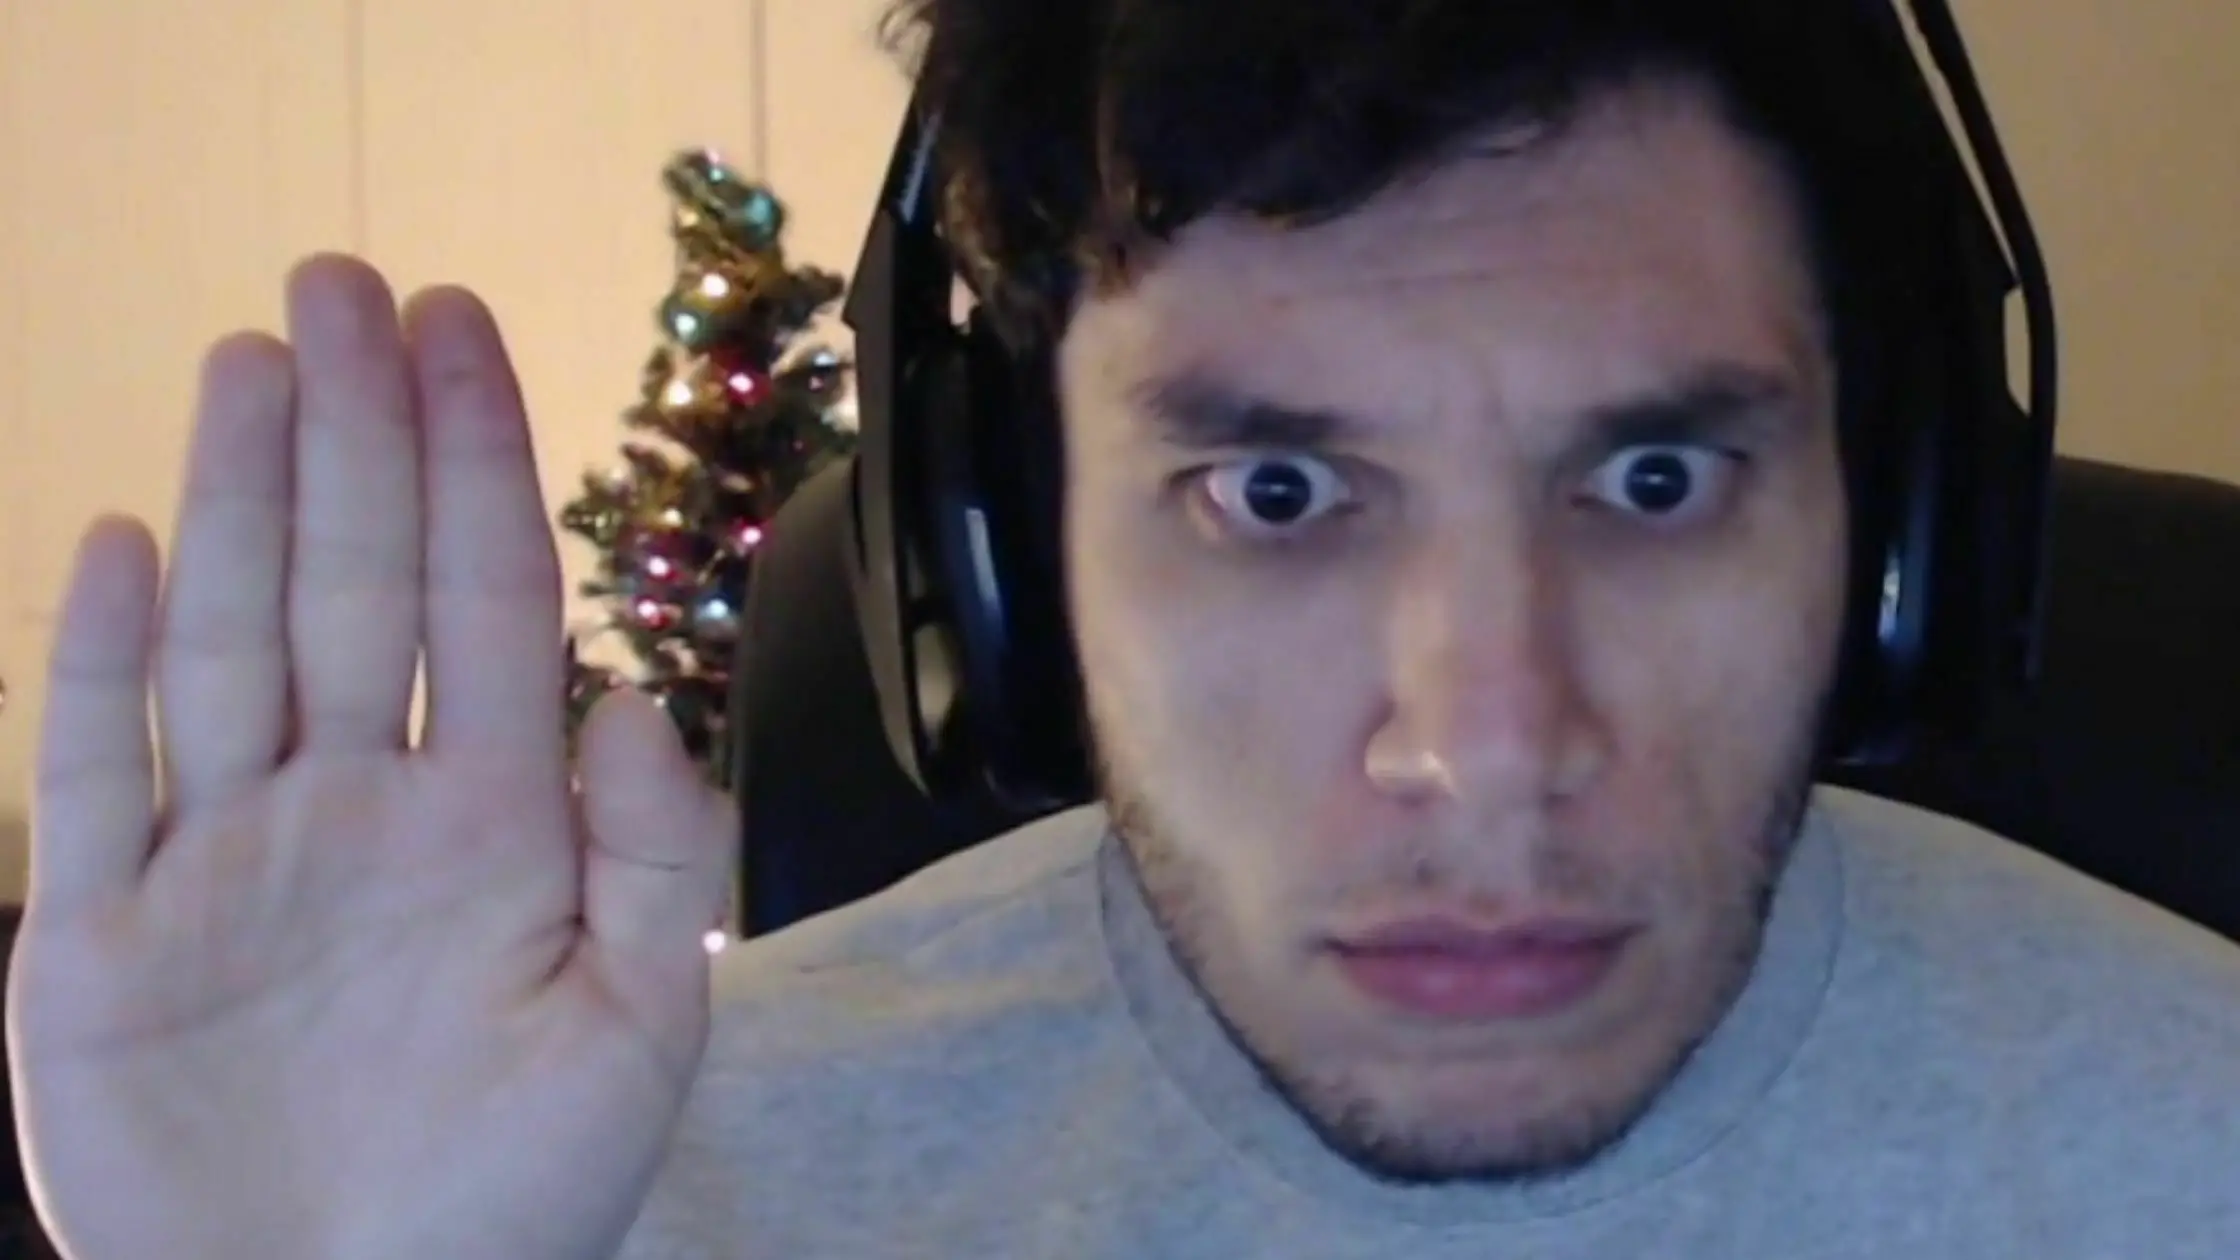 i-do-not-wish-to-take-a-break-or-quit-says-trainwrecks-in-an-emotional-message-to-fans